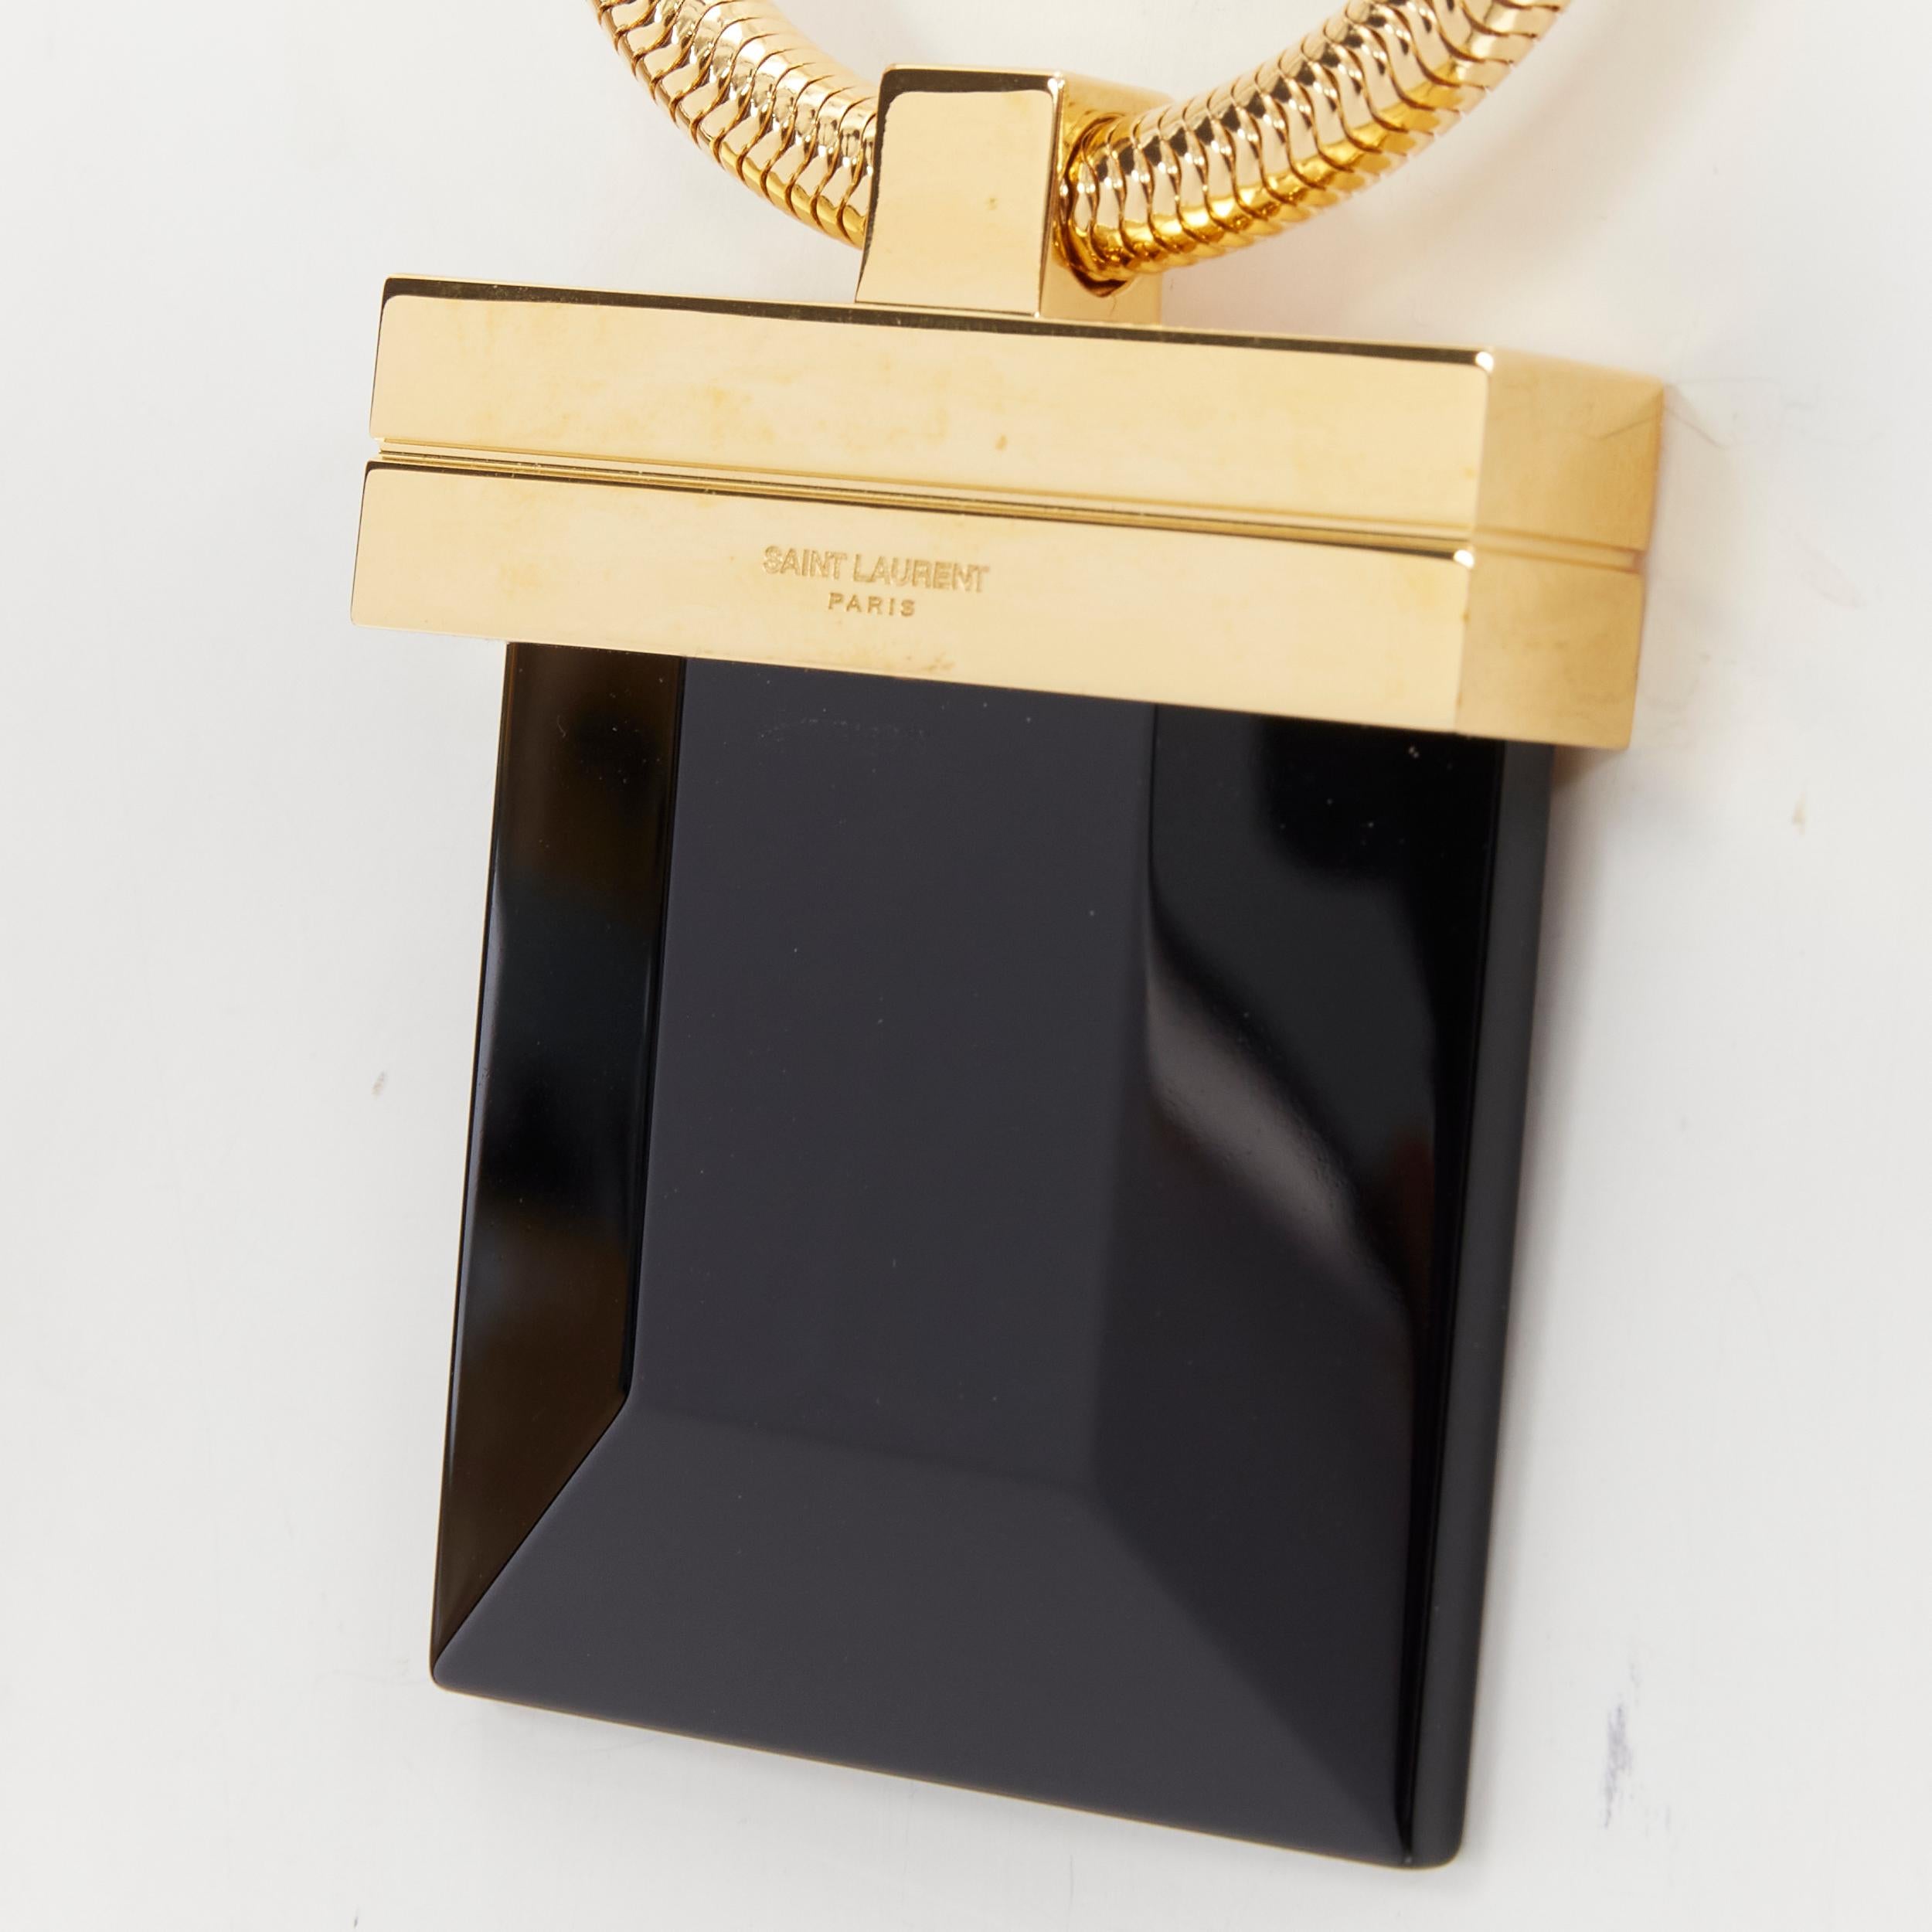 new SAINT LAURENT Hedi Slimane 2013 Opium runway black Onyx stone gold necklace 
Reference: TGAS/B01786 
Brand: Saint Laurent 
Designer: Hedi Slimane 
Collection: 2013 Runway 
Material: Brass 
Color: Gold 
Pattern: Solid 
Closure: Clasp 
Extra